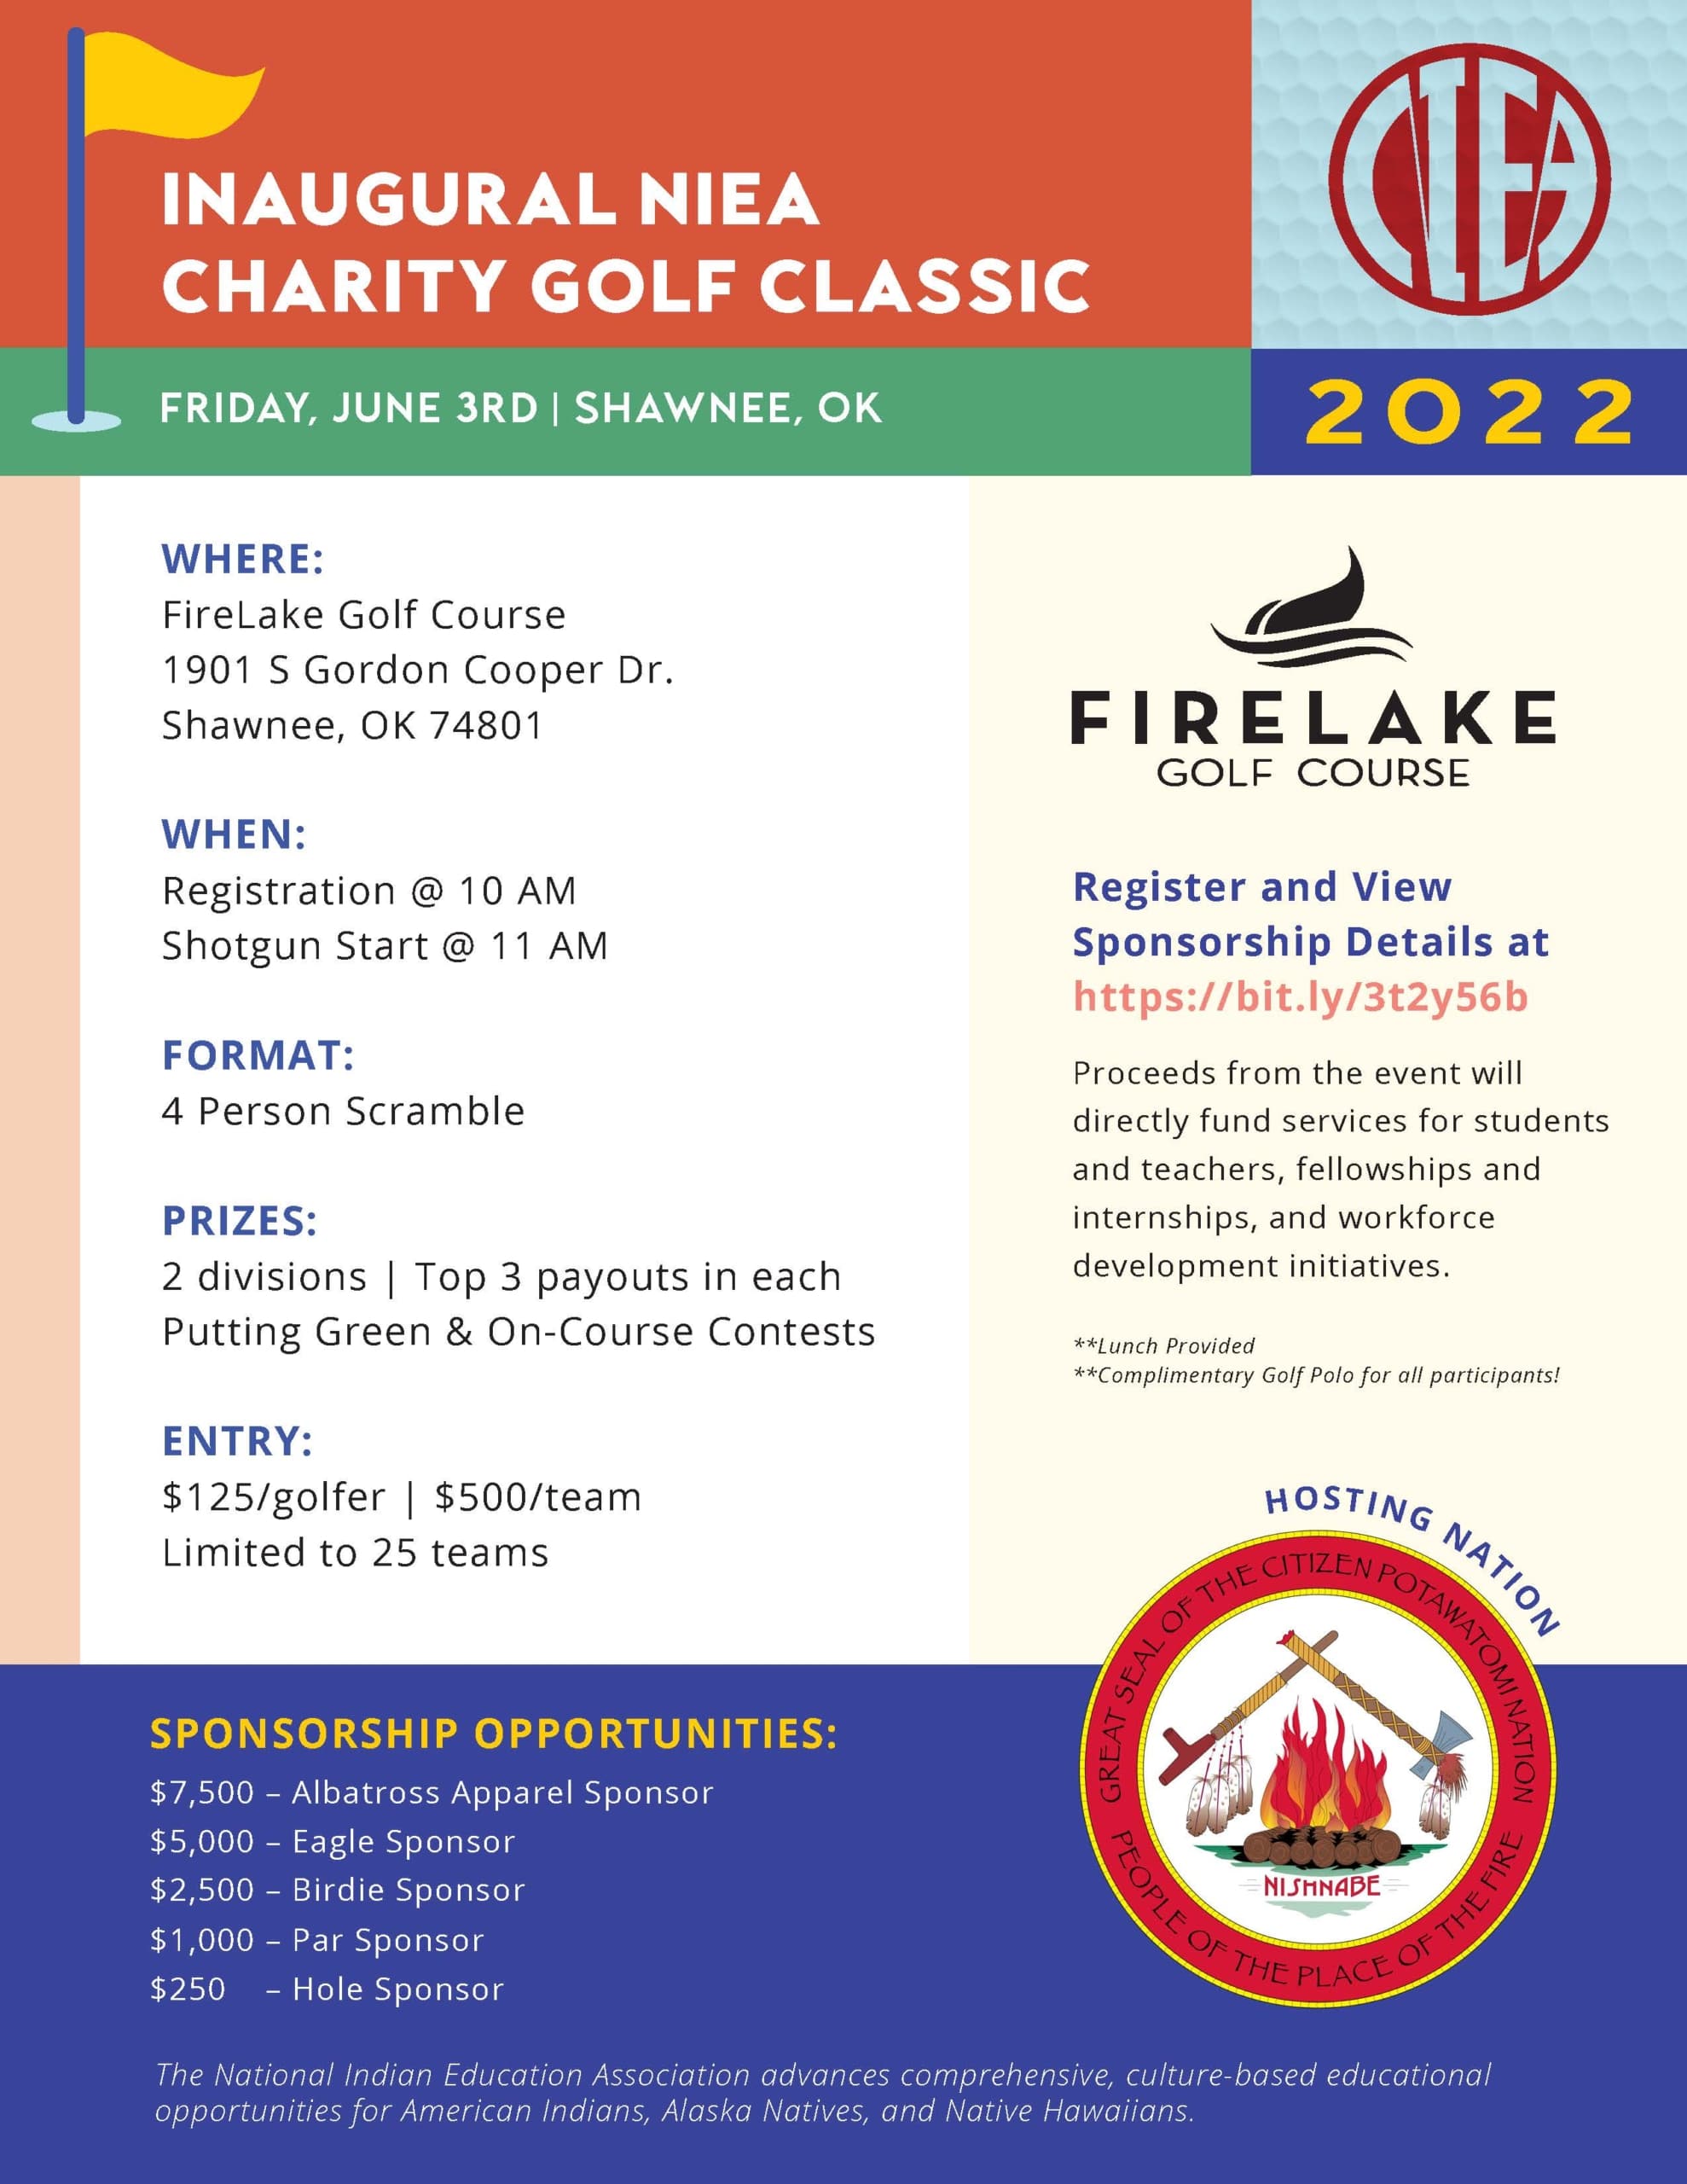 color block flyer describing the inaugural NIEA Charity Golf Classic, to be held at FireLake Golf Course on Friday, June 3, 2022.